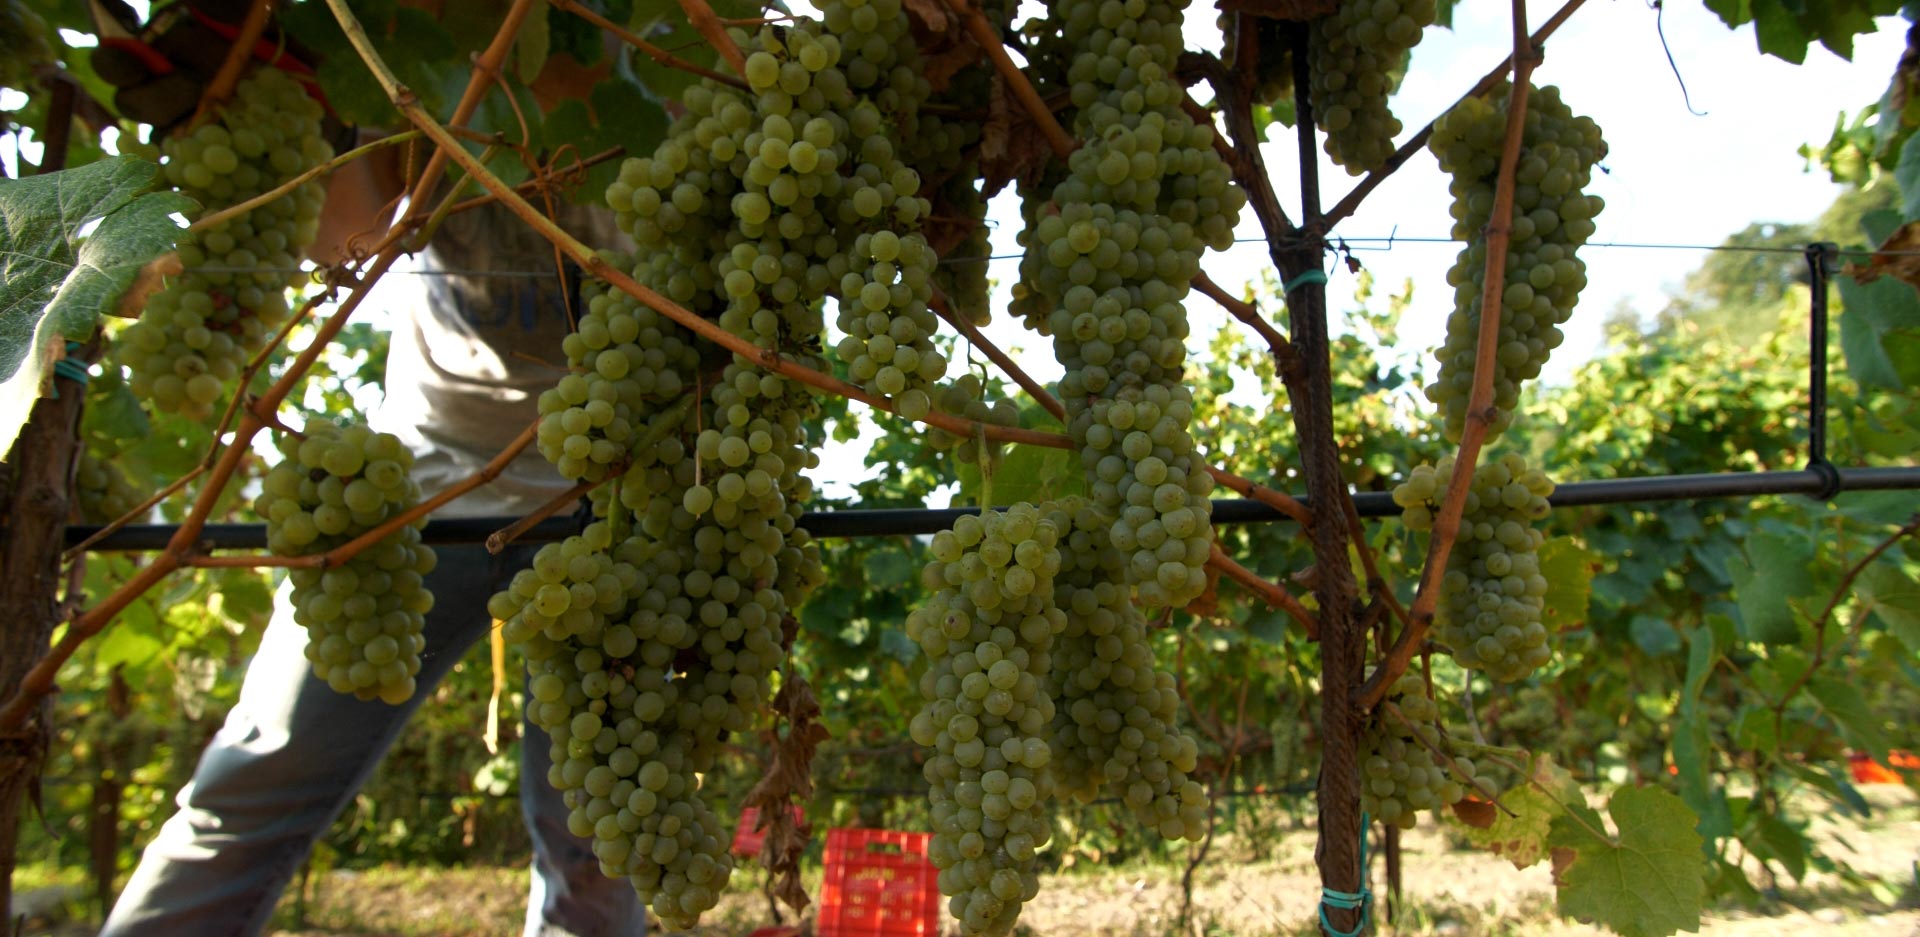 Photos of the bunches of grapes that are harvested